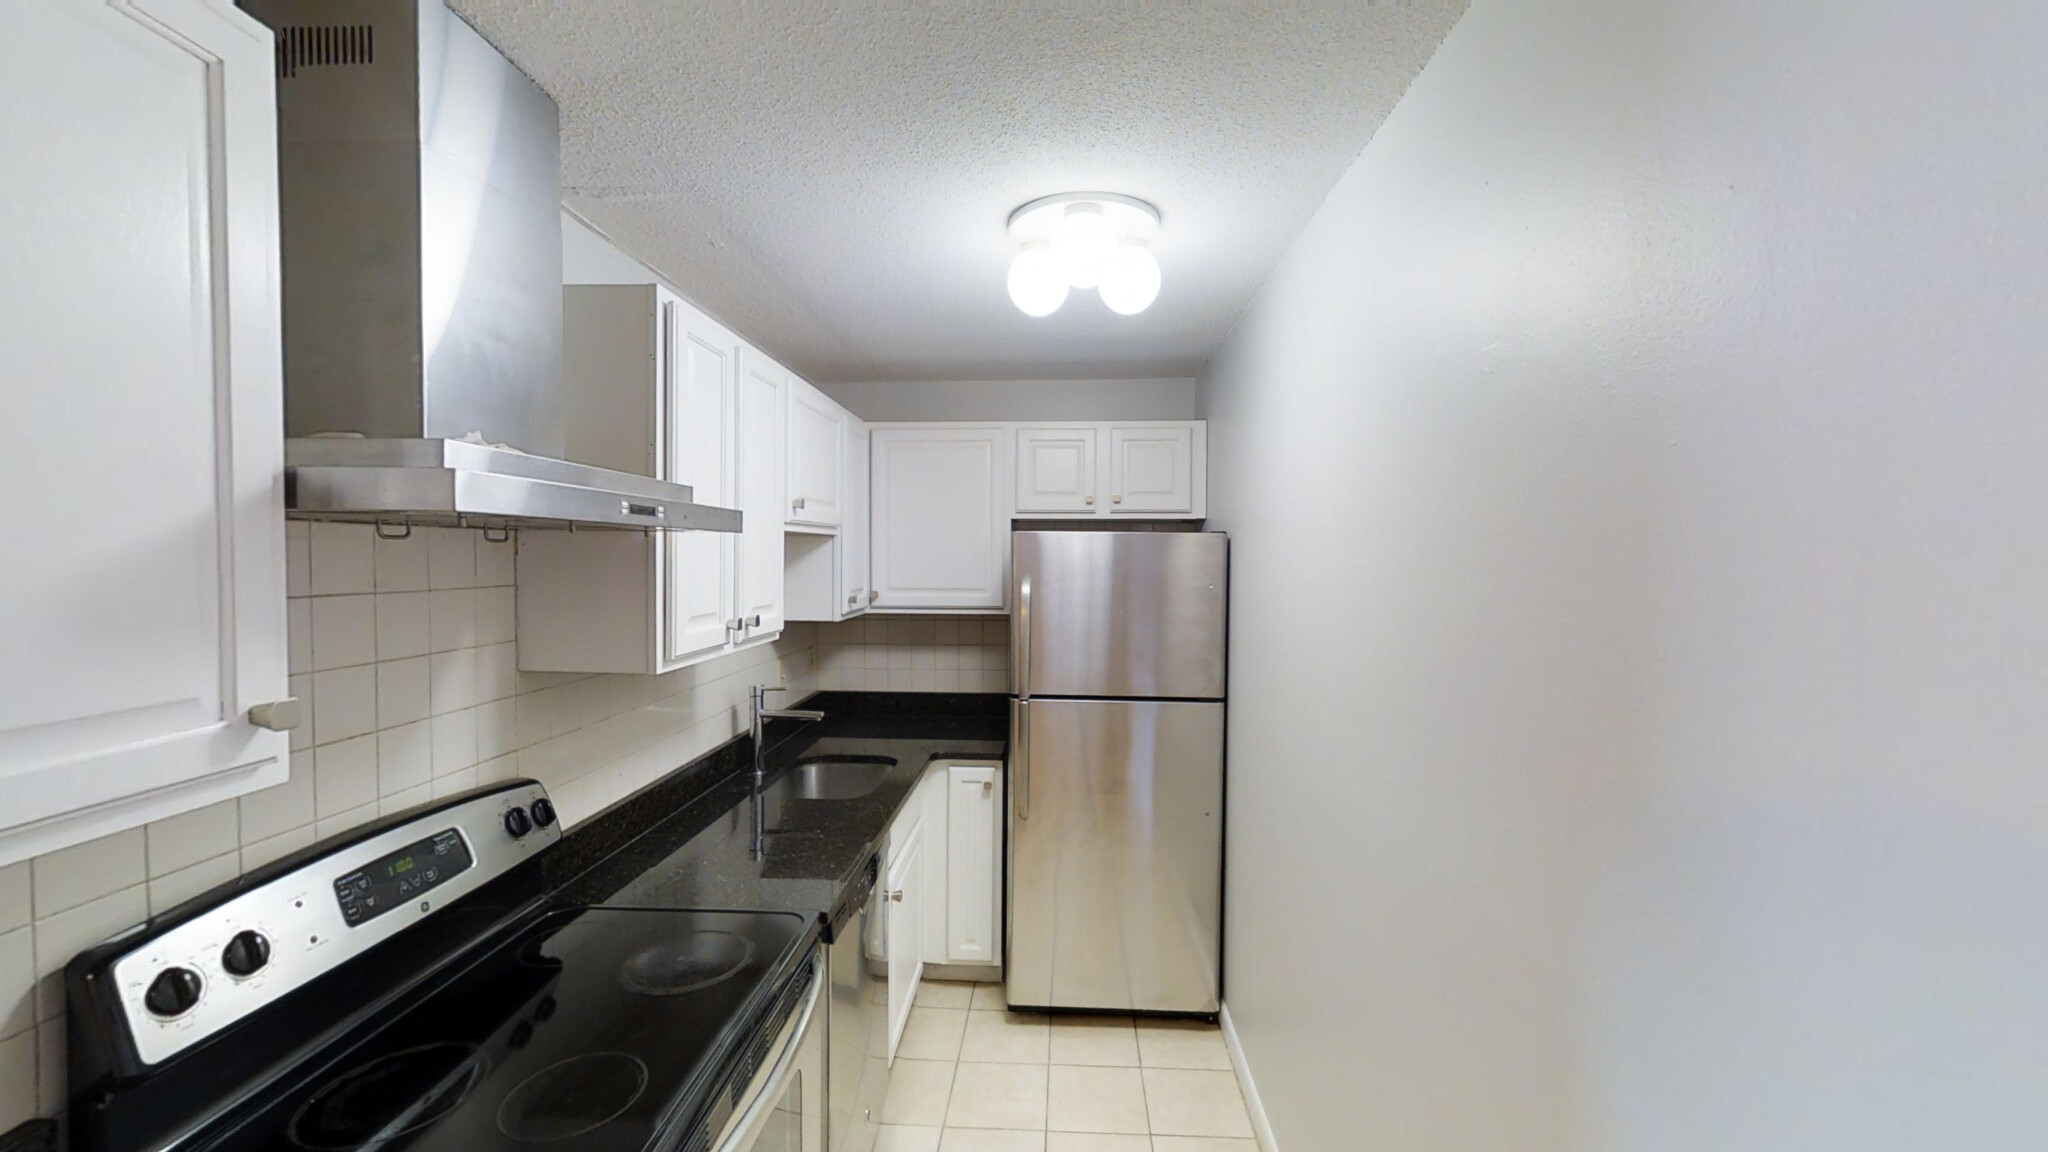 Photos of apartment on Alewife Brooke Pkwy.,Somerville MA 02144